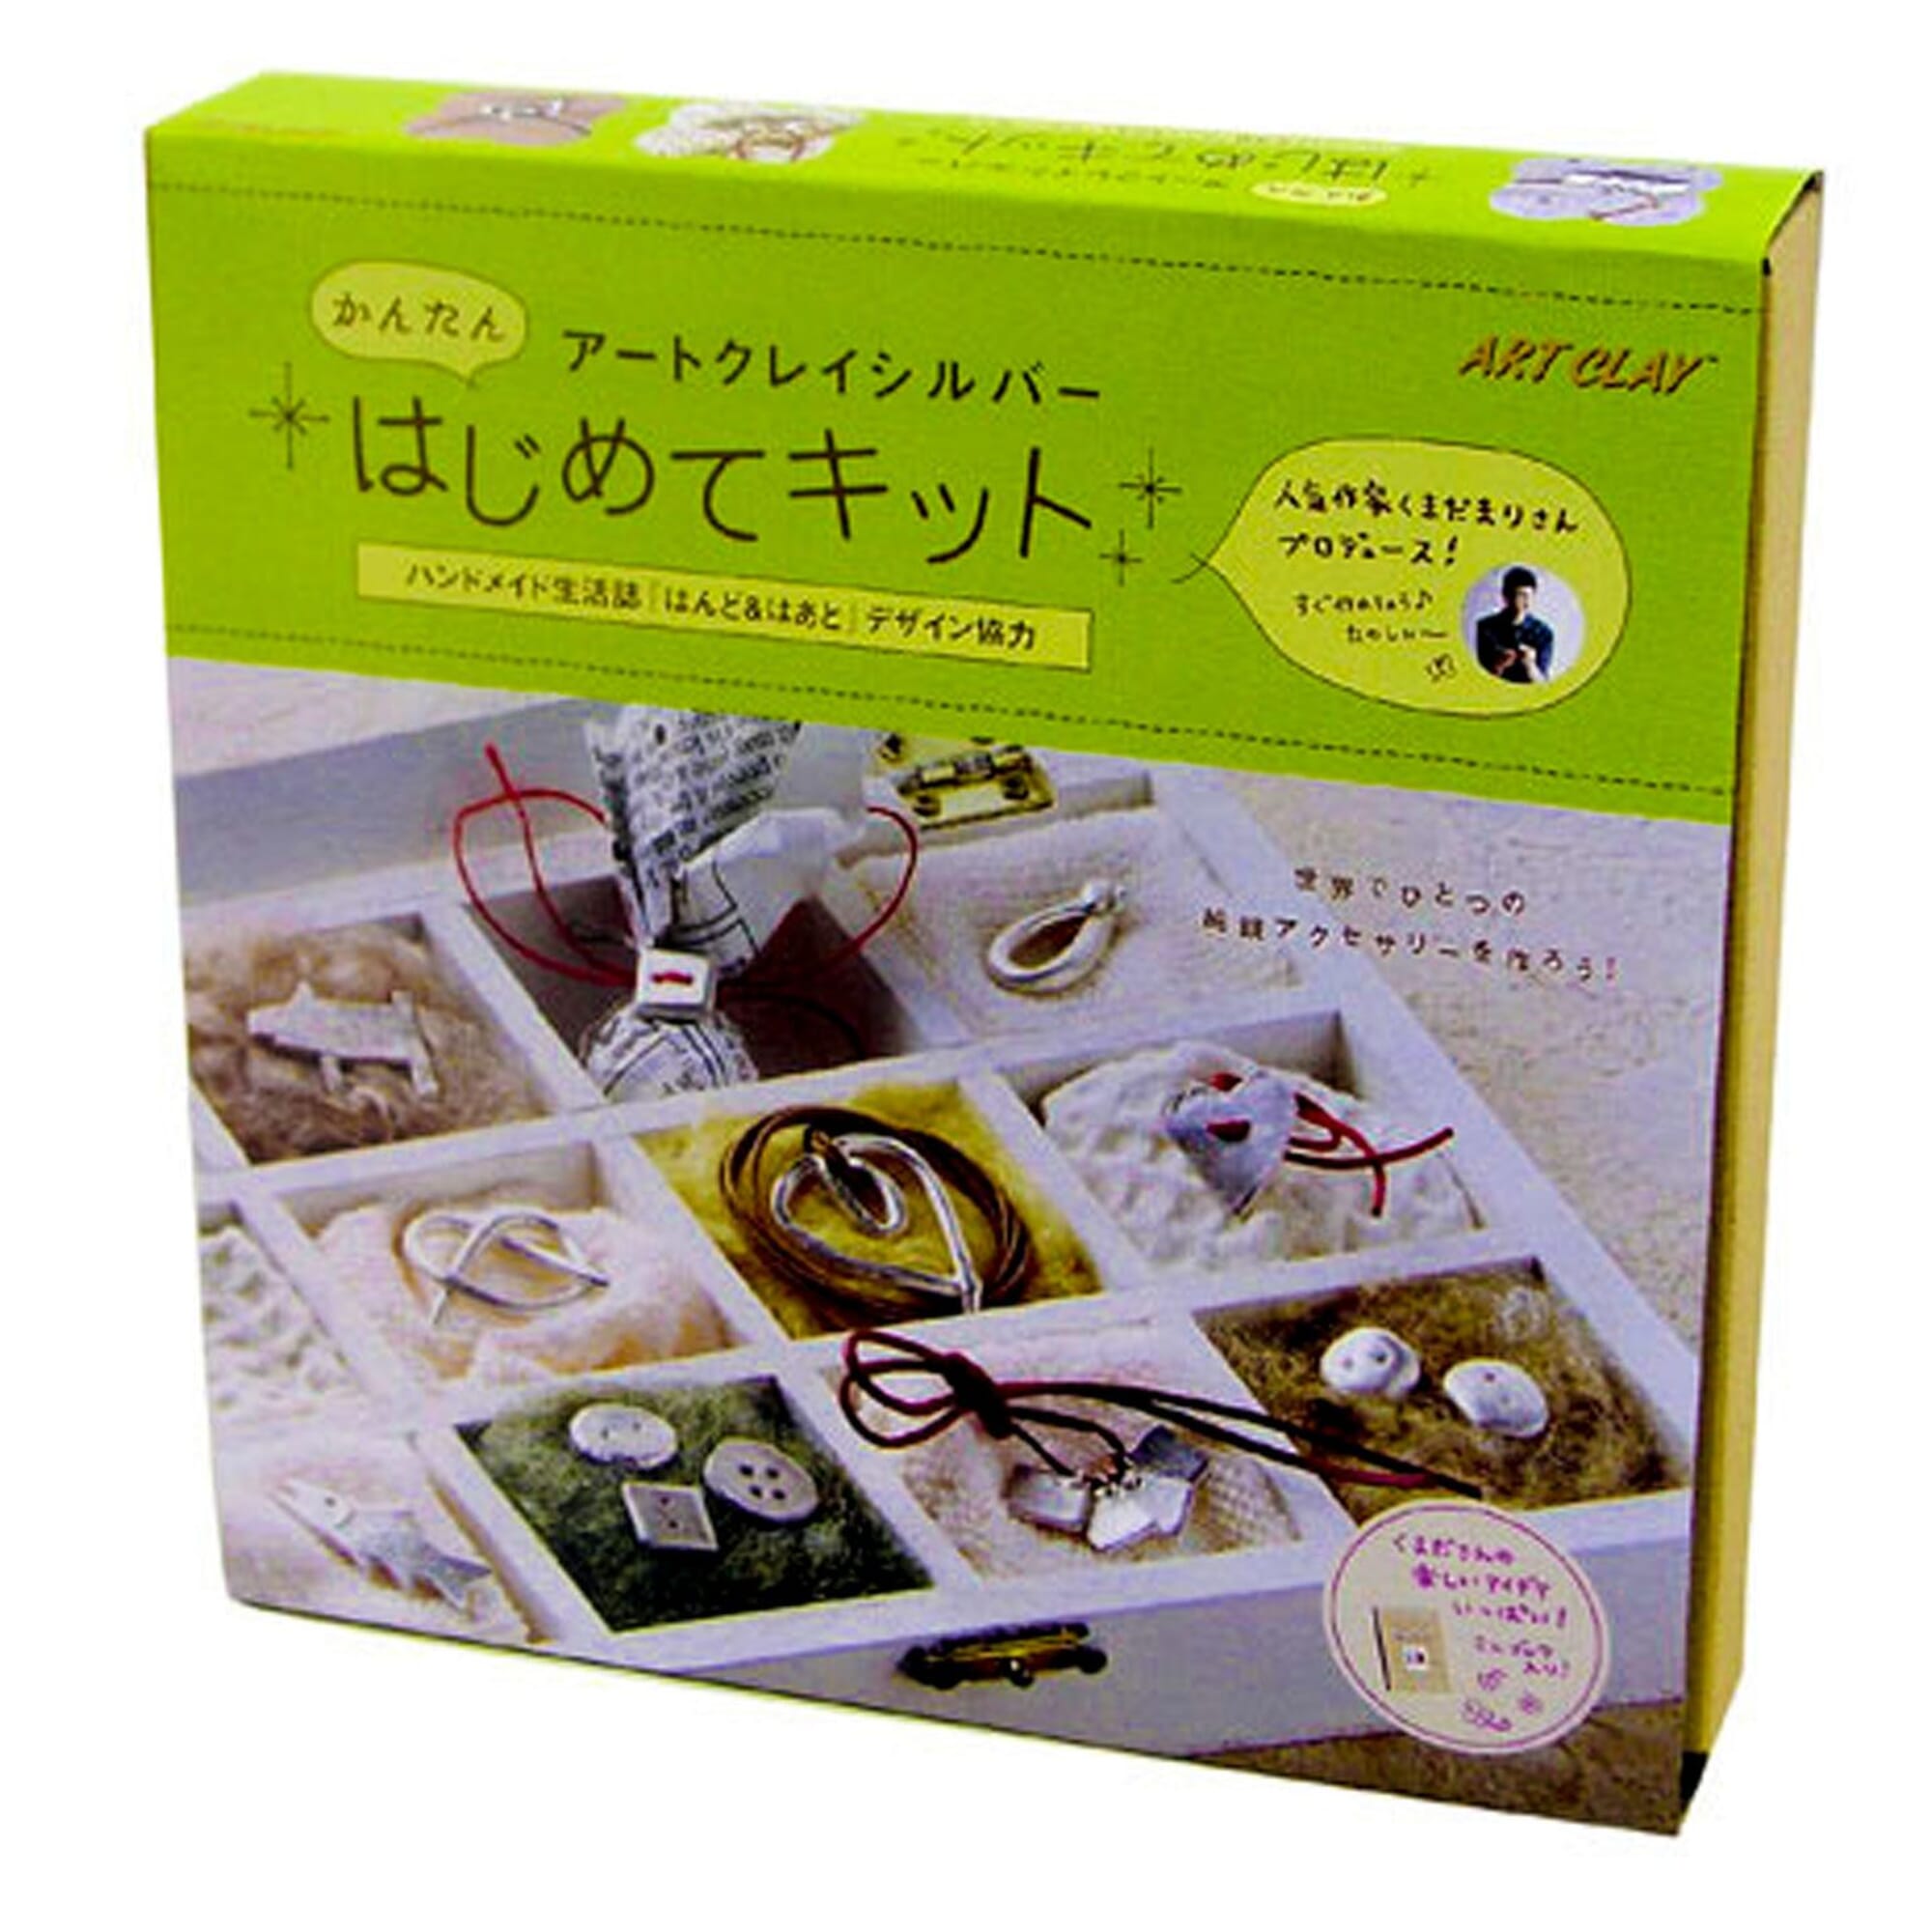 Art Clay Starter Kit Japanese DIY Basic Silver Clay Tools Kiln Set, with  Instruction Guide, for Charms & Jewelry Making